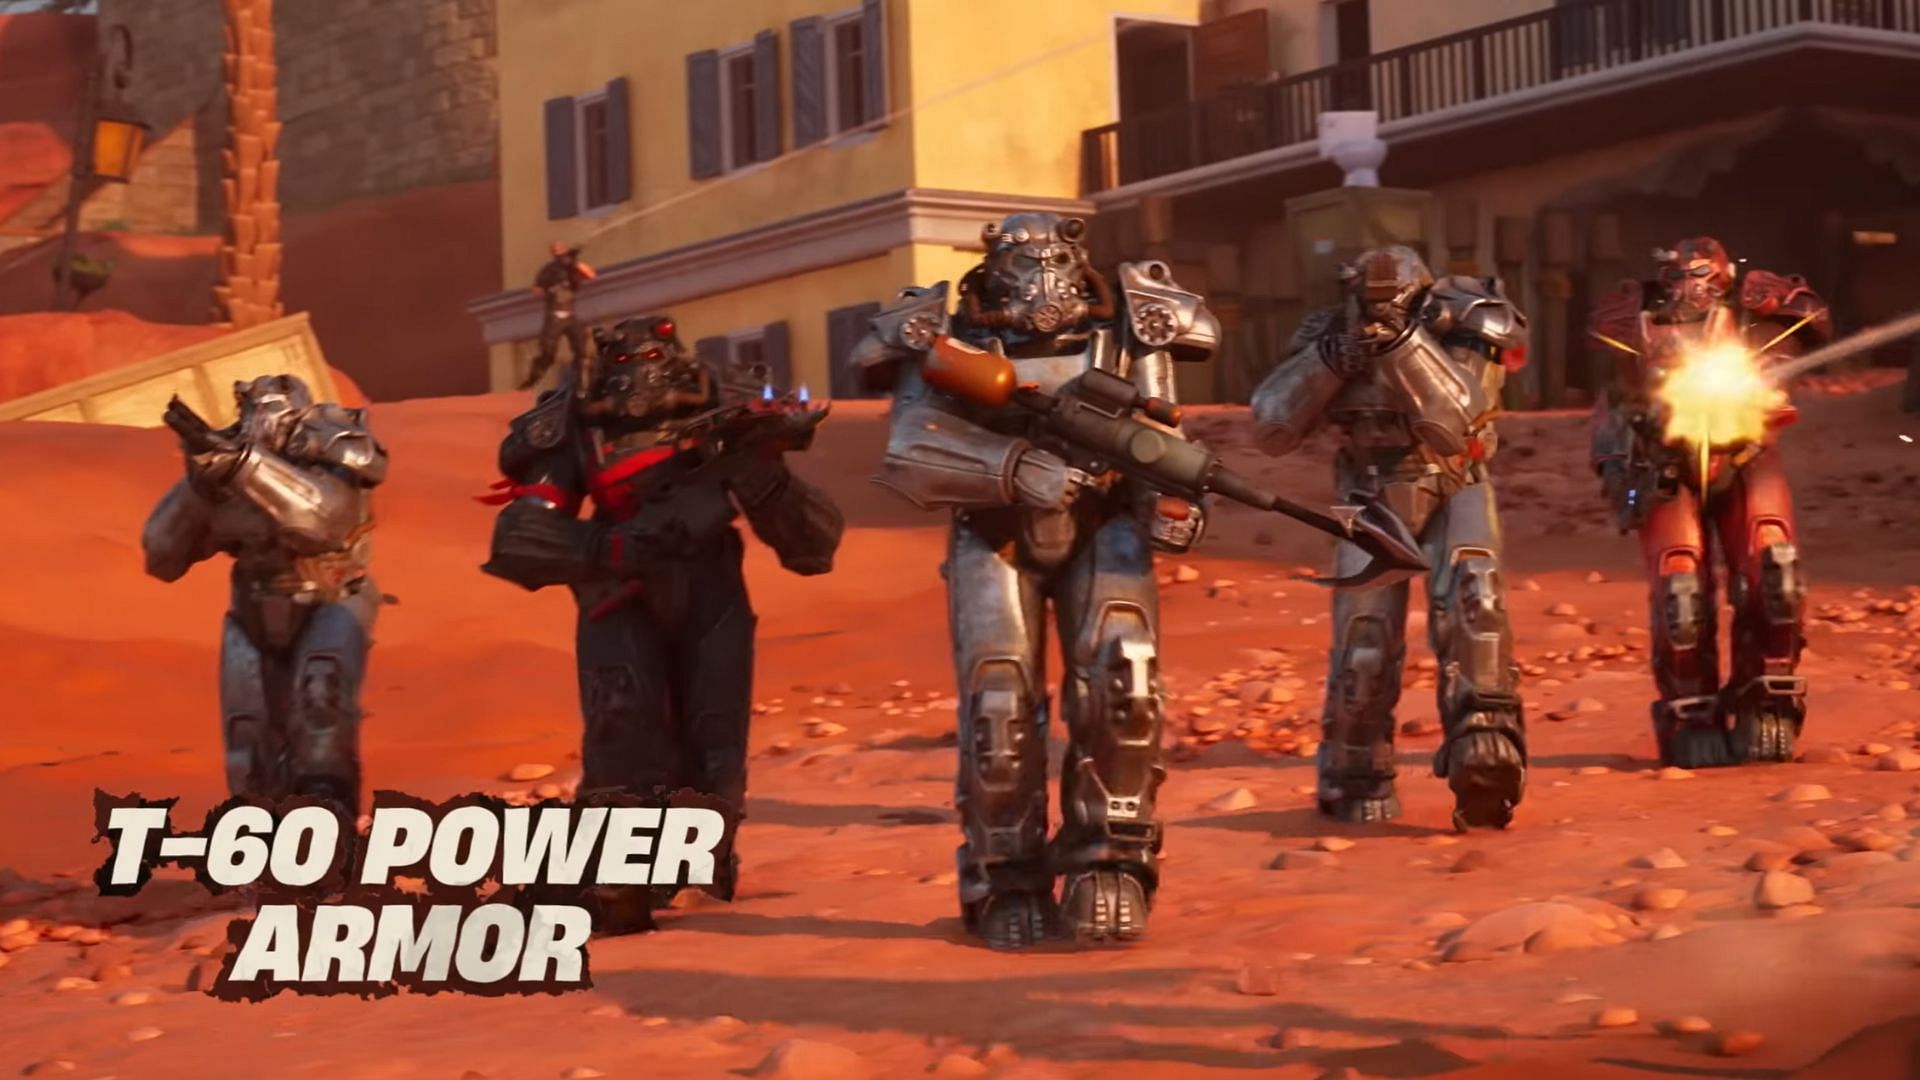 Sandy Steppes was first seen in the T-60 Power Armor teaser (Image via Epic Games)